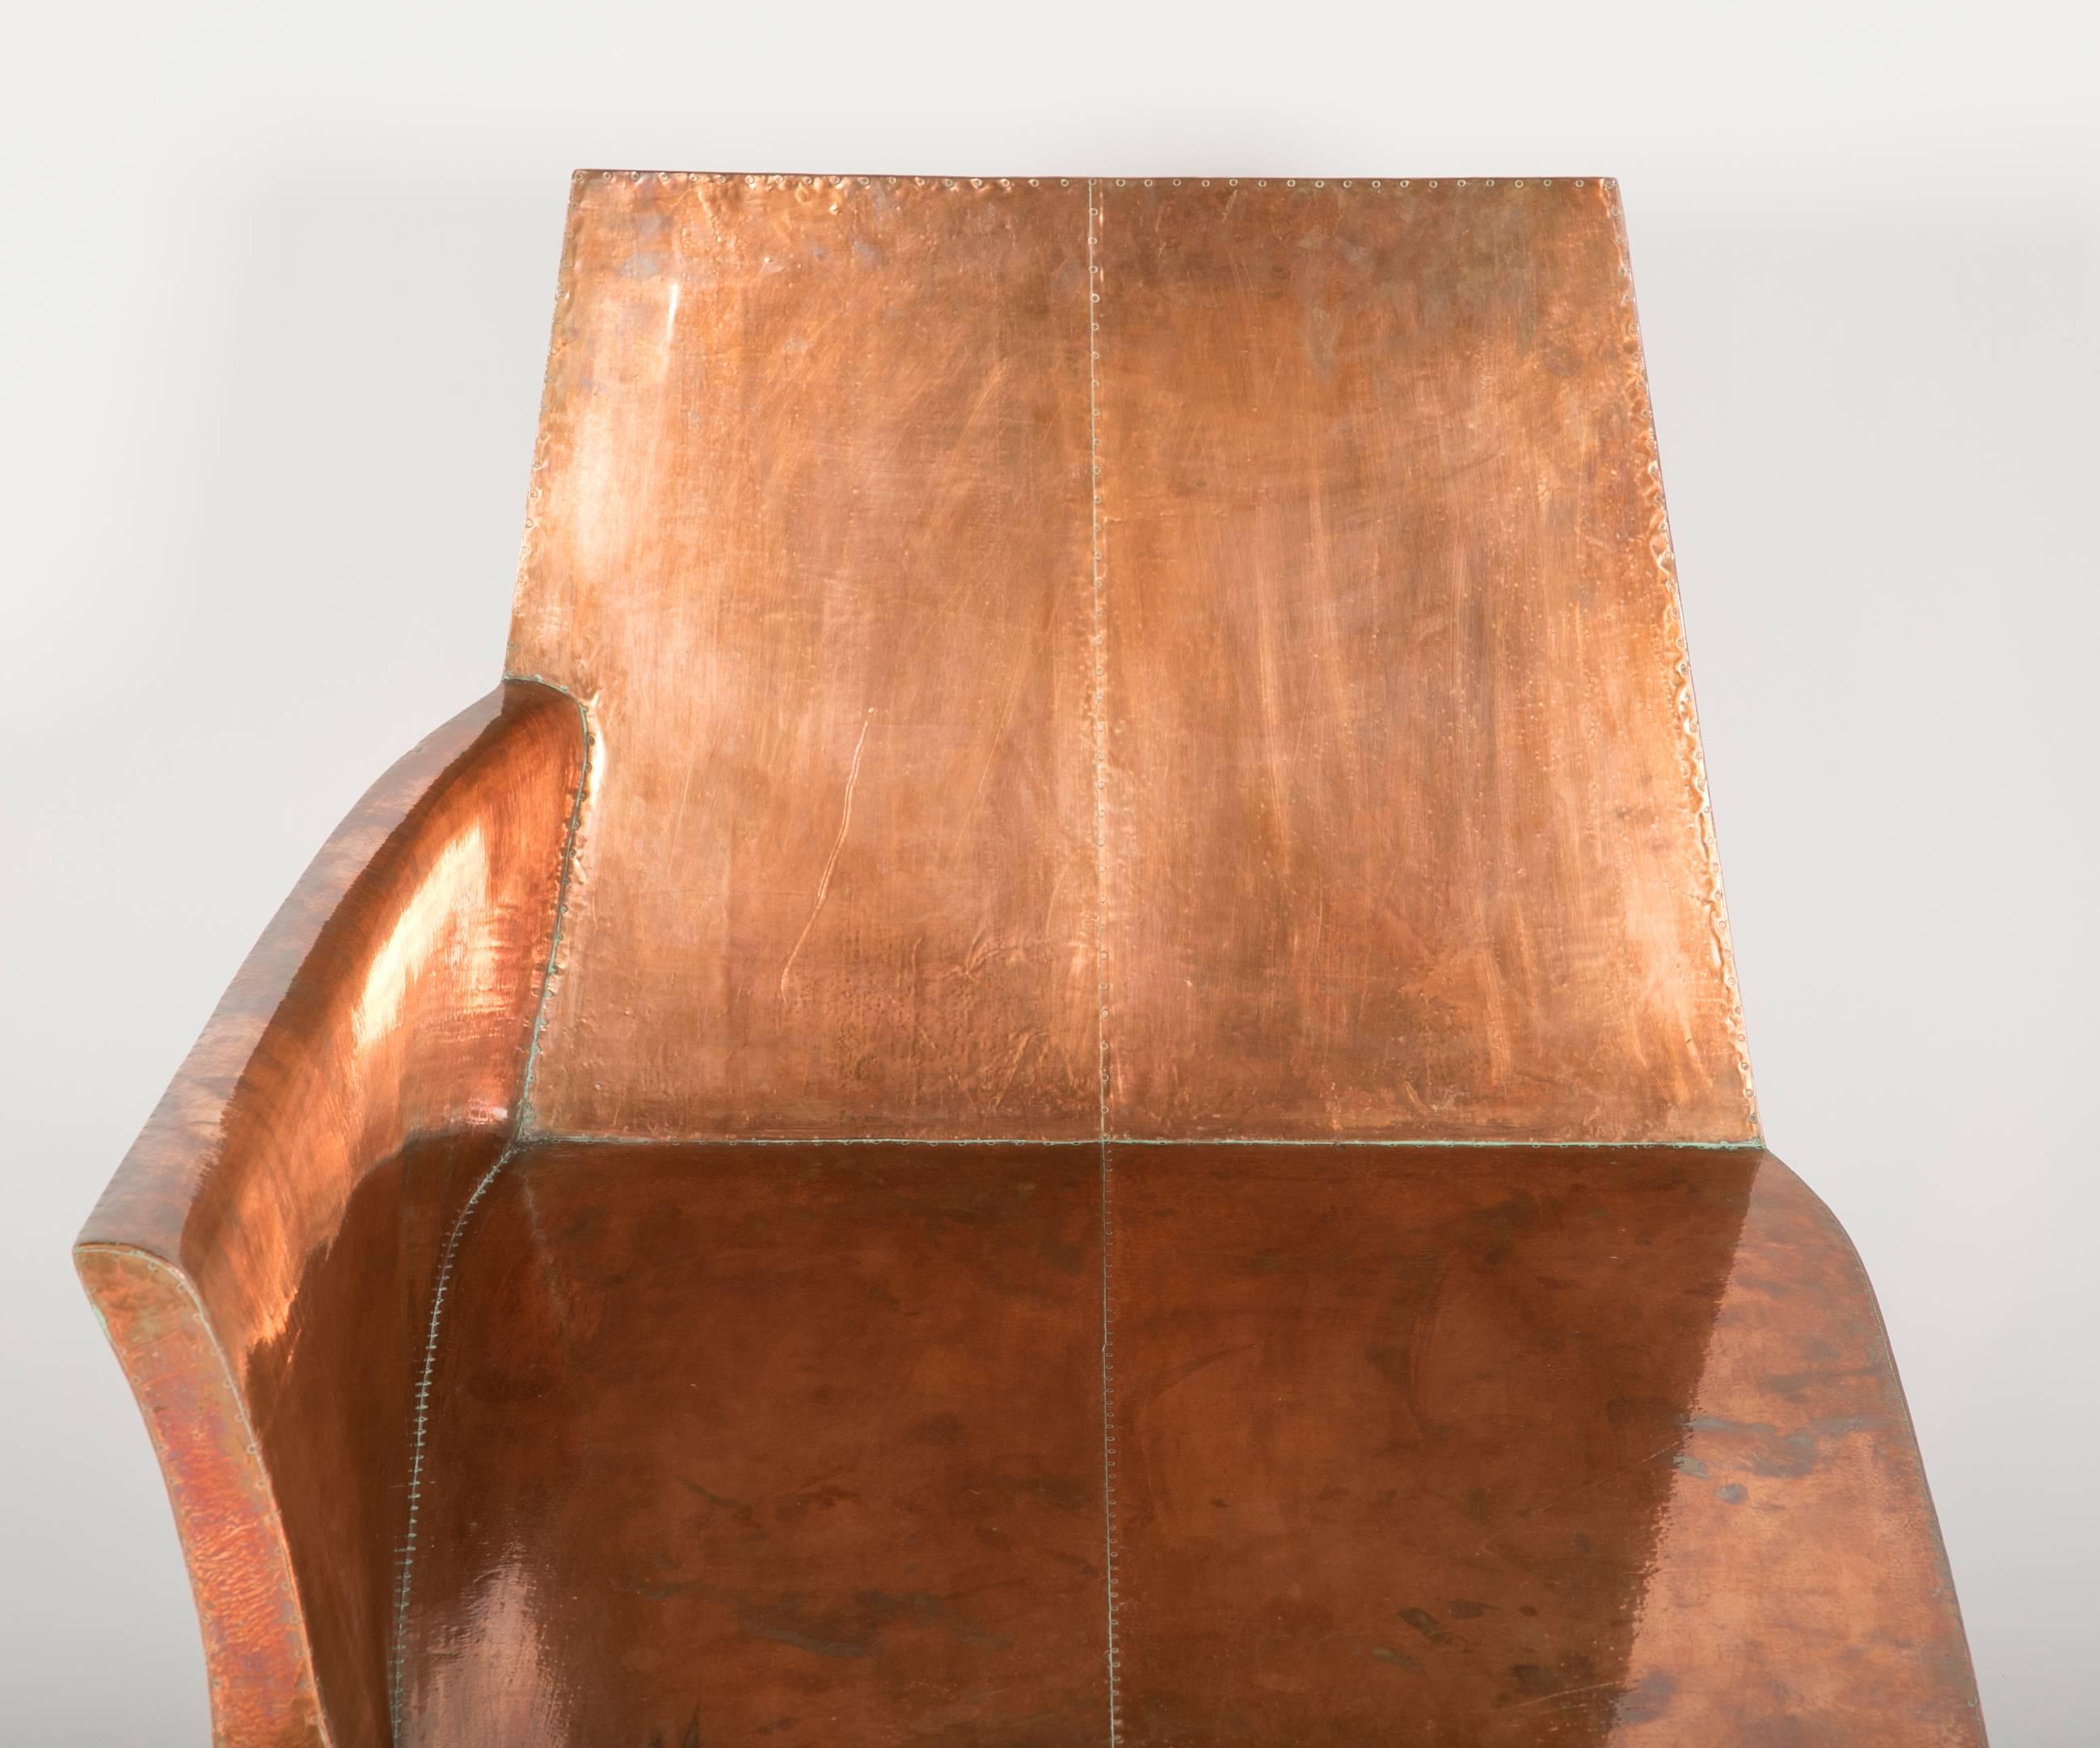 Copper Clad Chaise Designed by Paul Mathieu for Stephanie Odegard Co. Ltd.  2